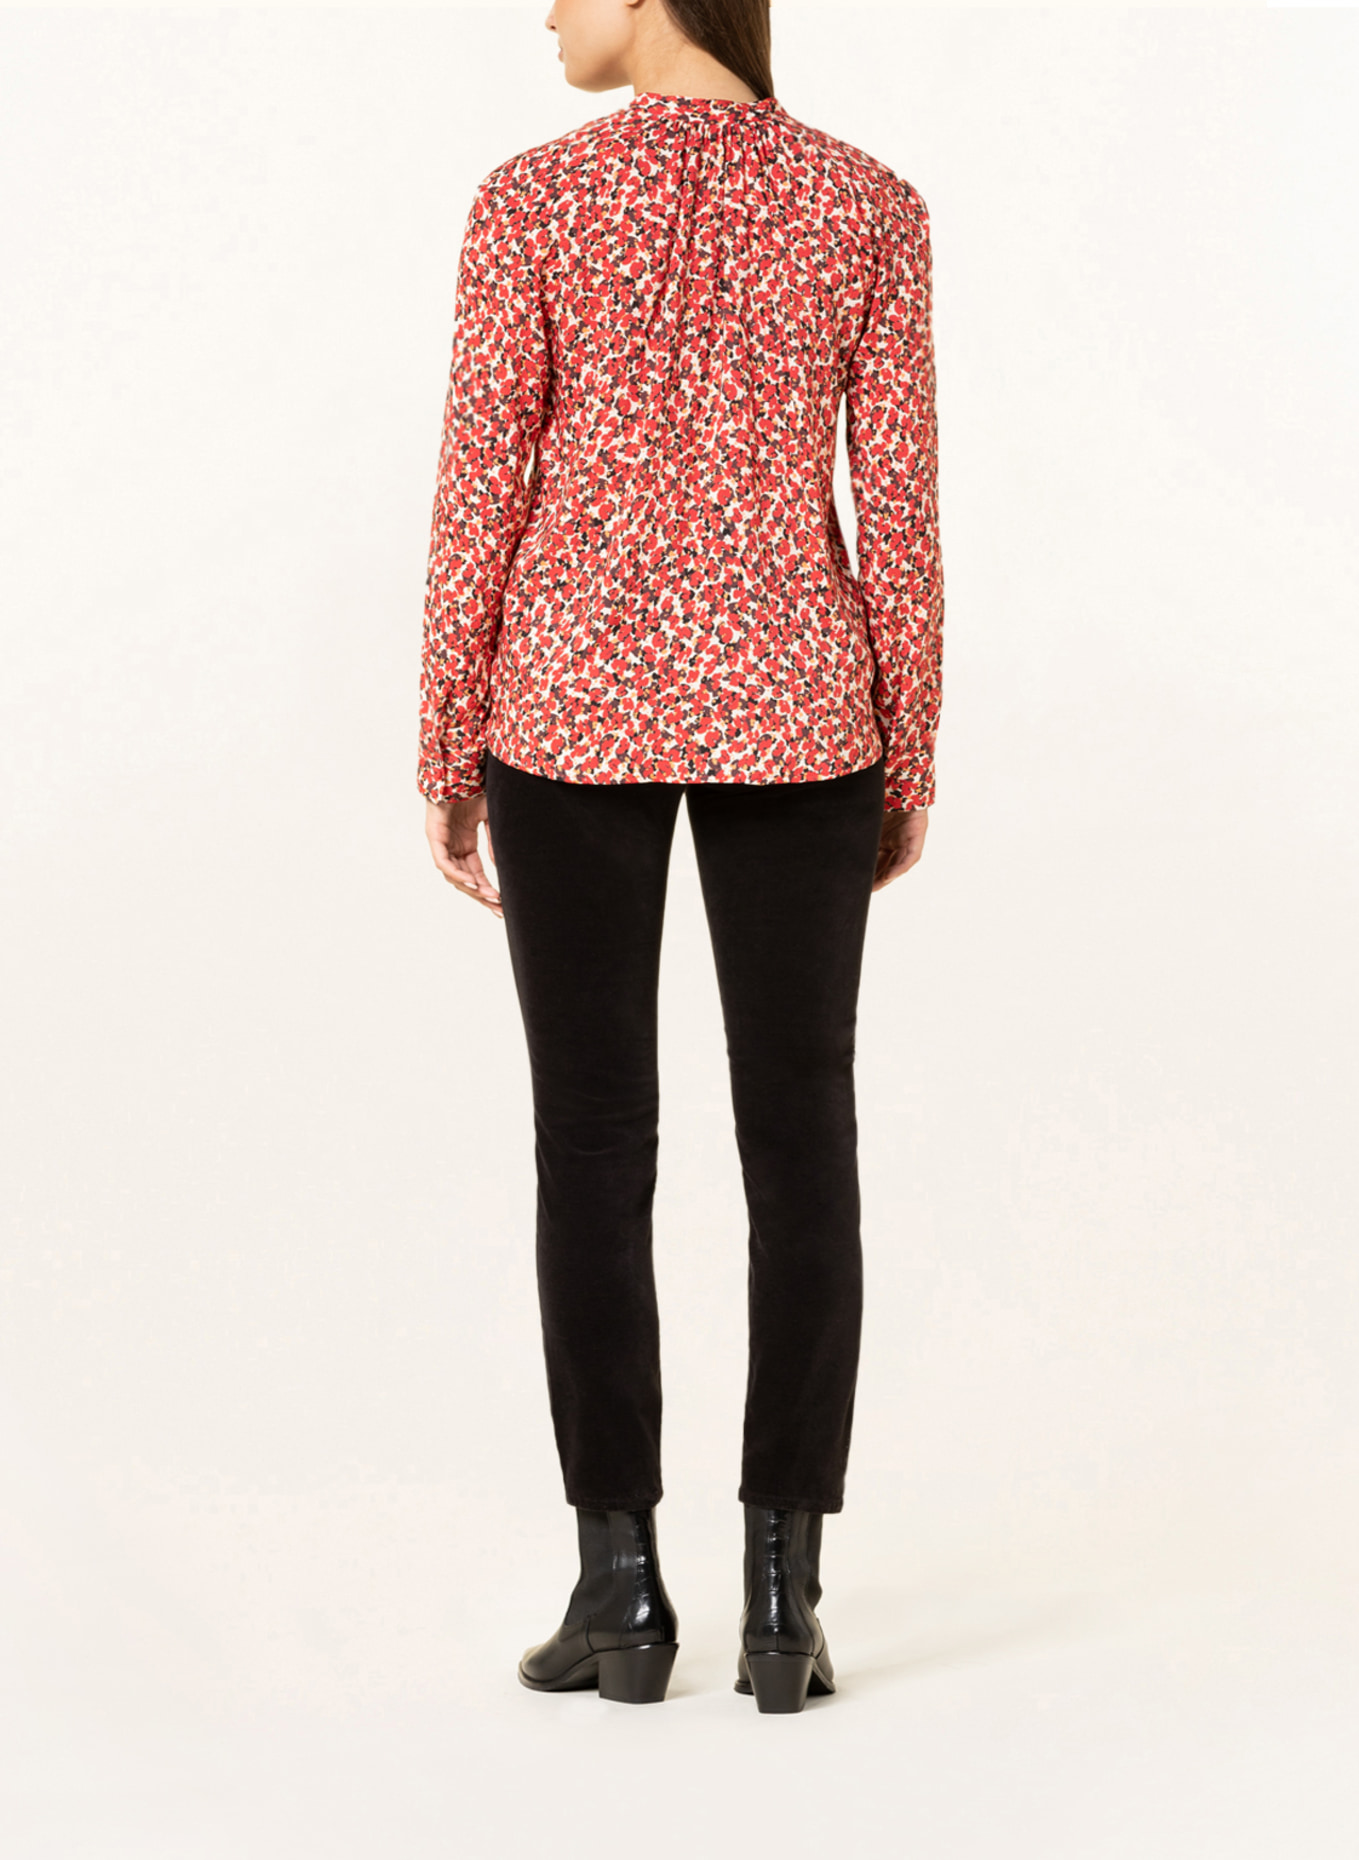 RIANI Shirt blouse, Color: RED/ CREAM/ DARK BROWN (Image 3)